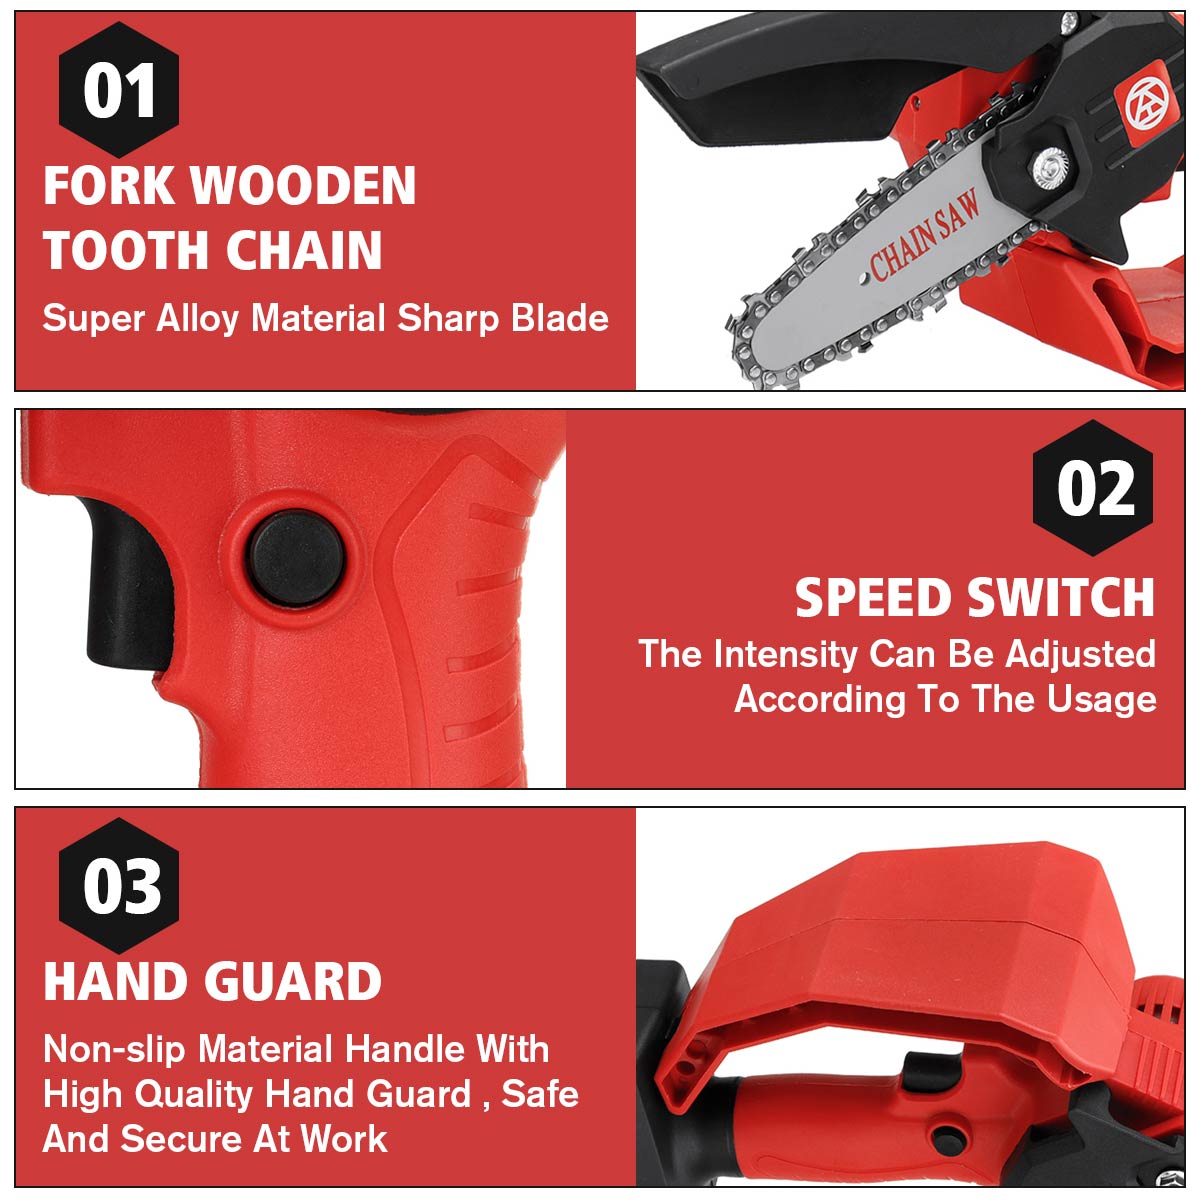 98VF-Electric-One-Hand-Saw-Chain-Saw-Woodworking-Belt-Hand-Guard-Kit-1854549-4